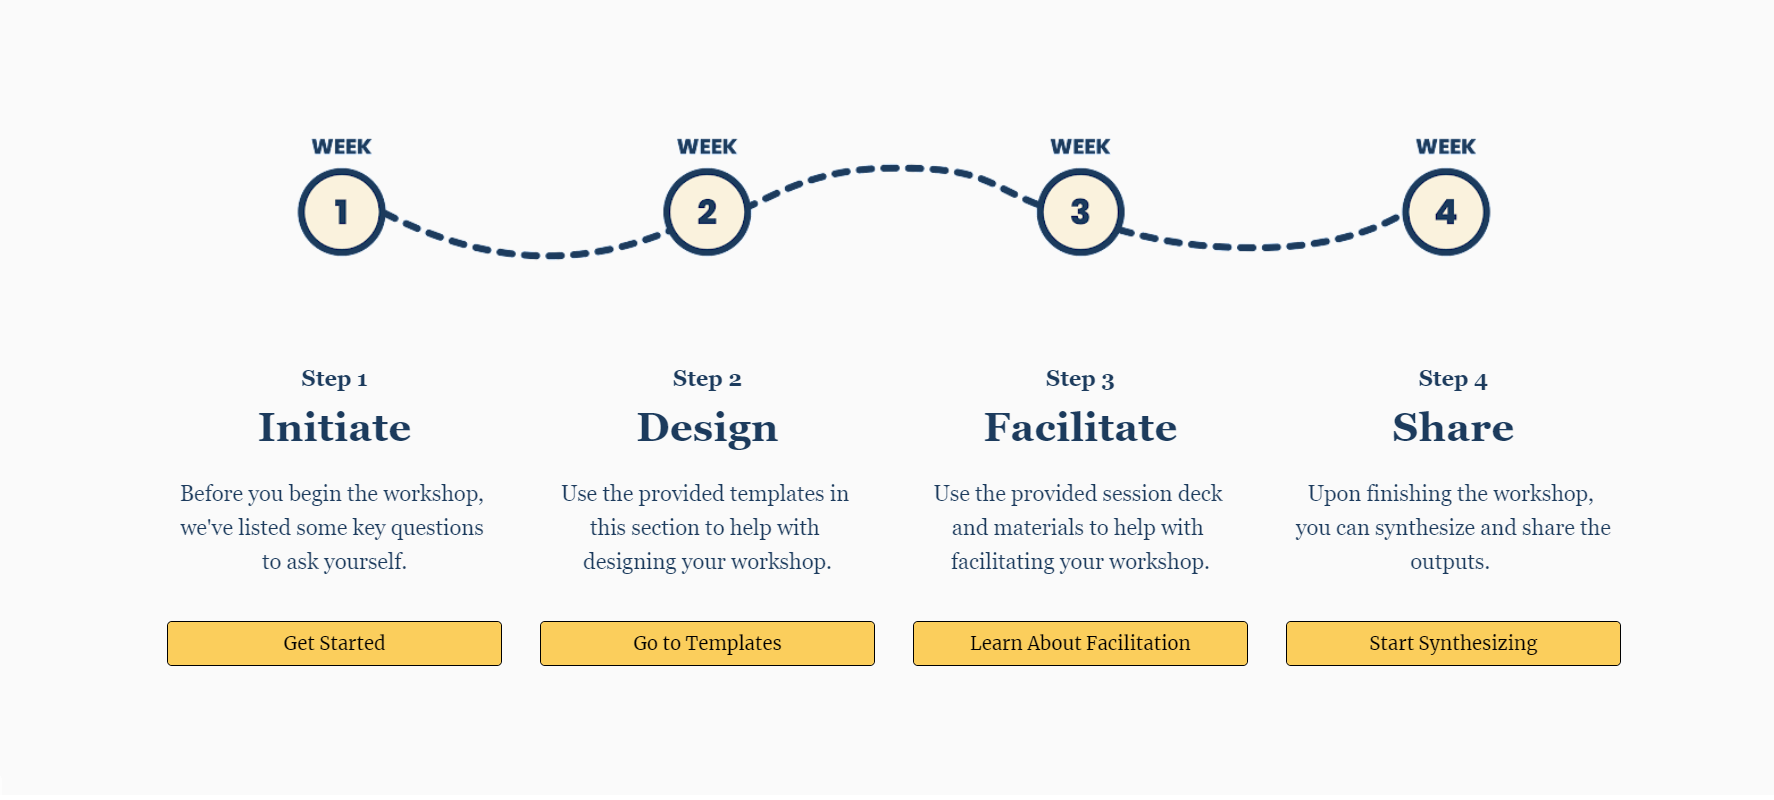 the First steps to creating a workshop are initiate, design, facilitate, and share